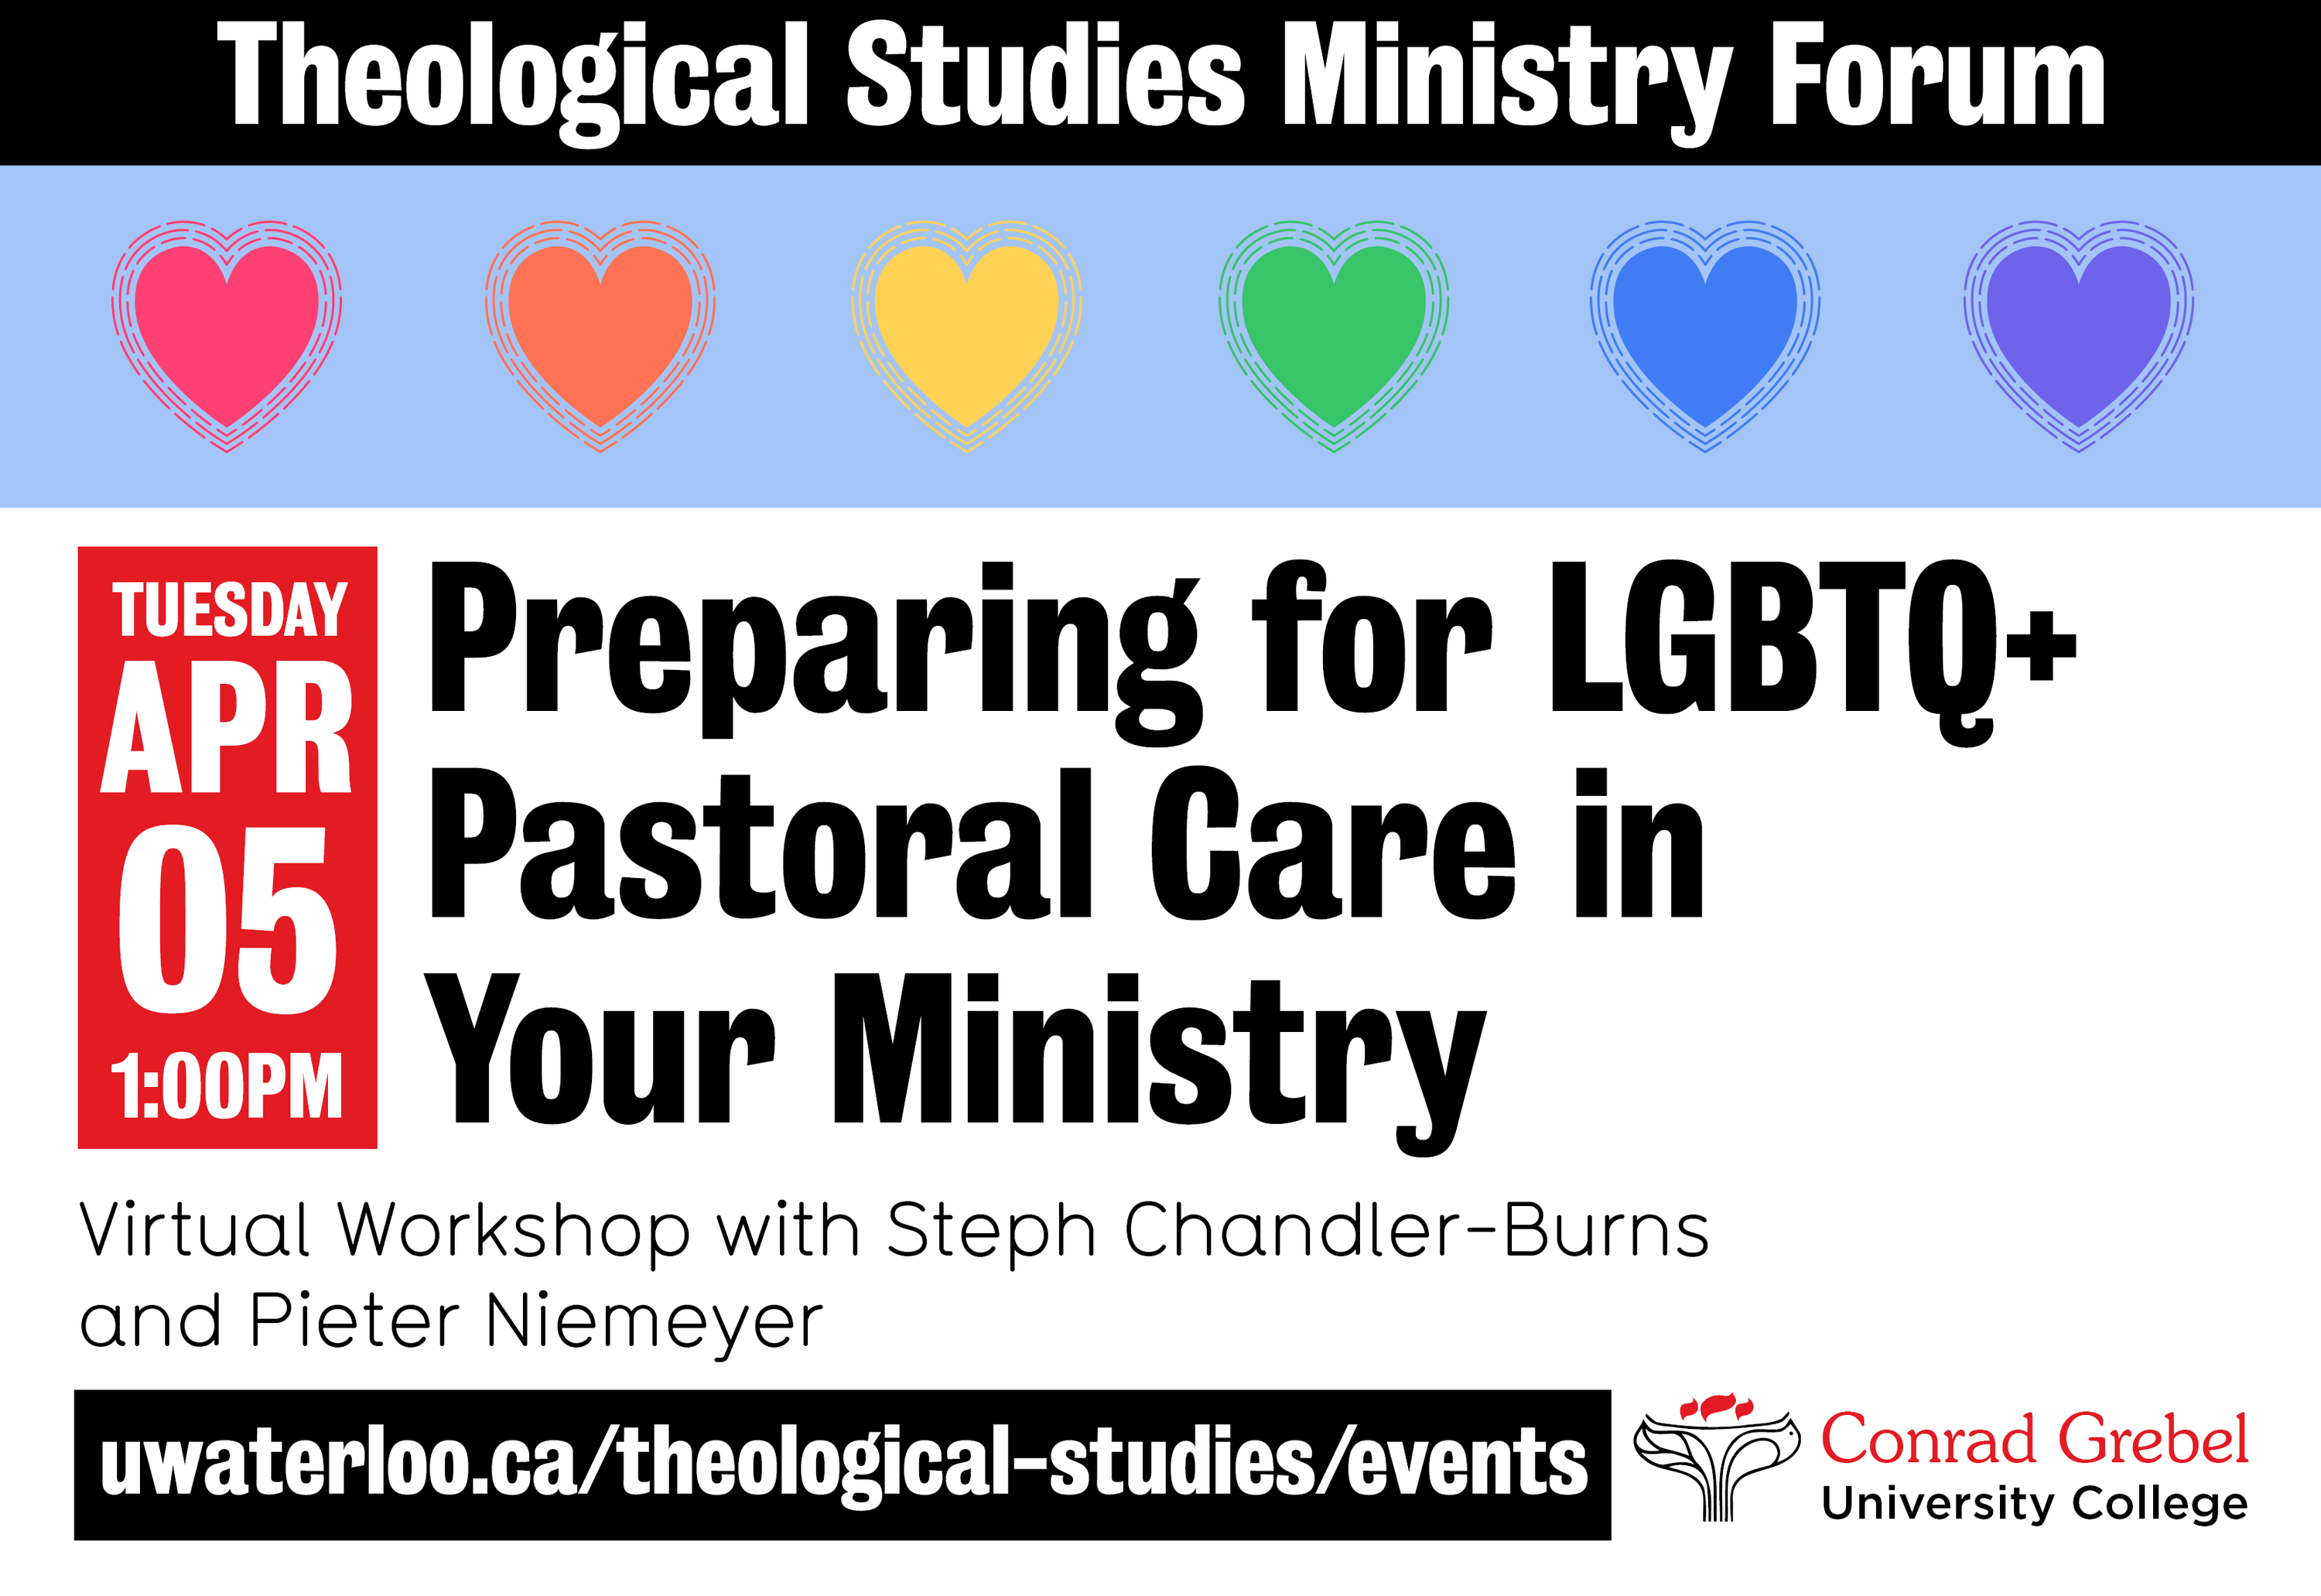 Preparing for LGBTQ+ pastoral care in your ministry